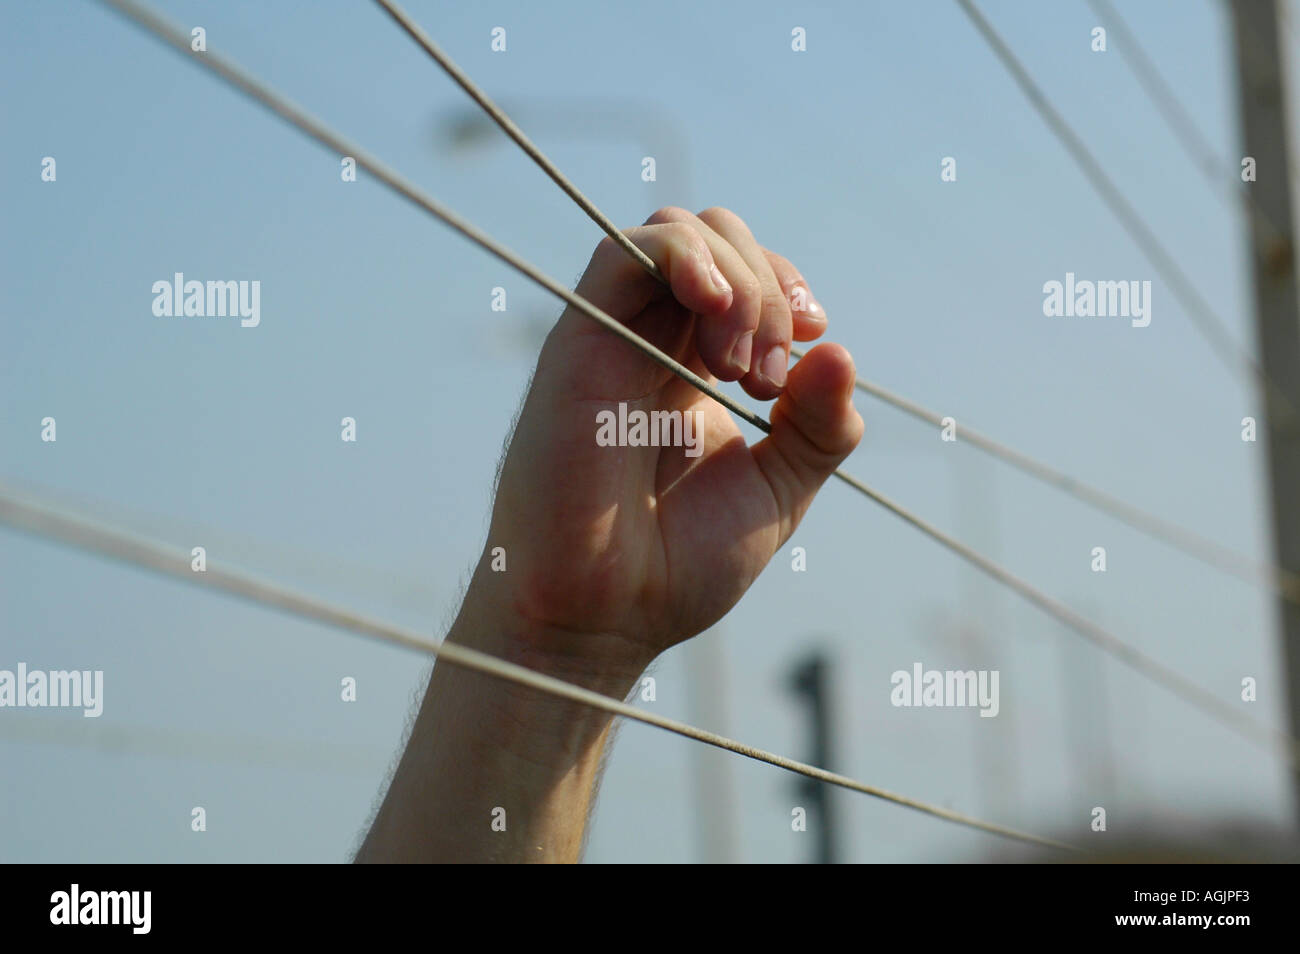 Person hand grasping wire fence Stock Photo